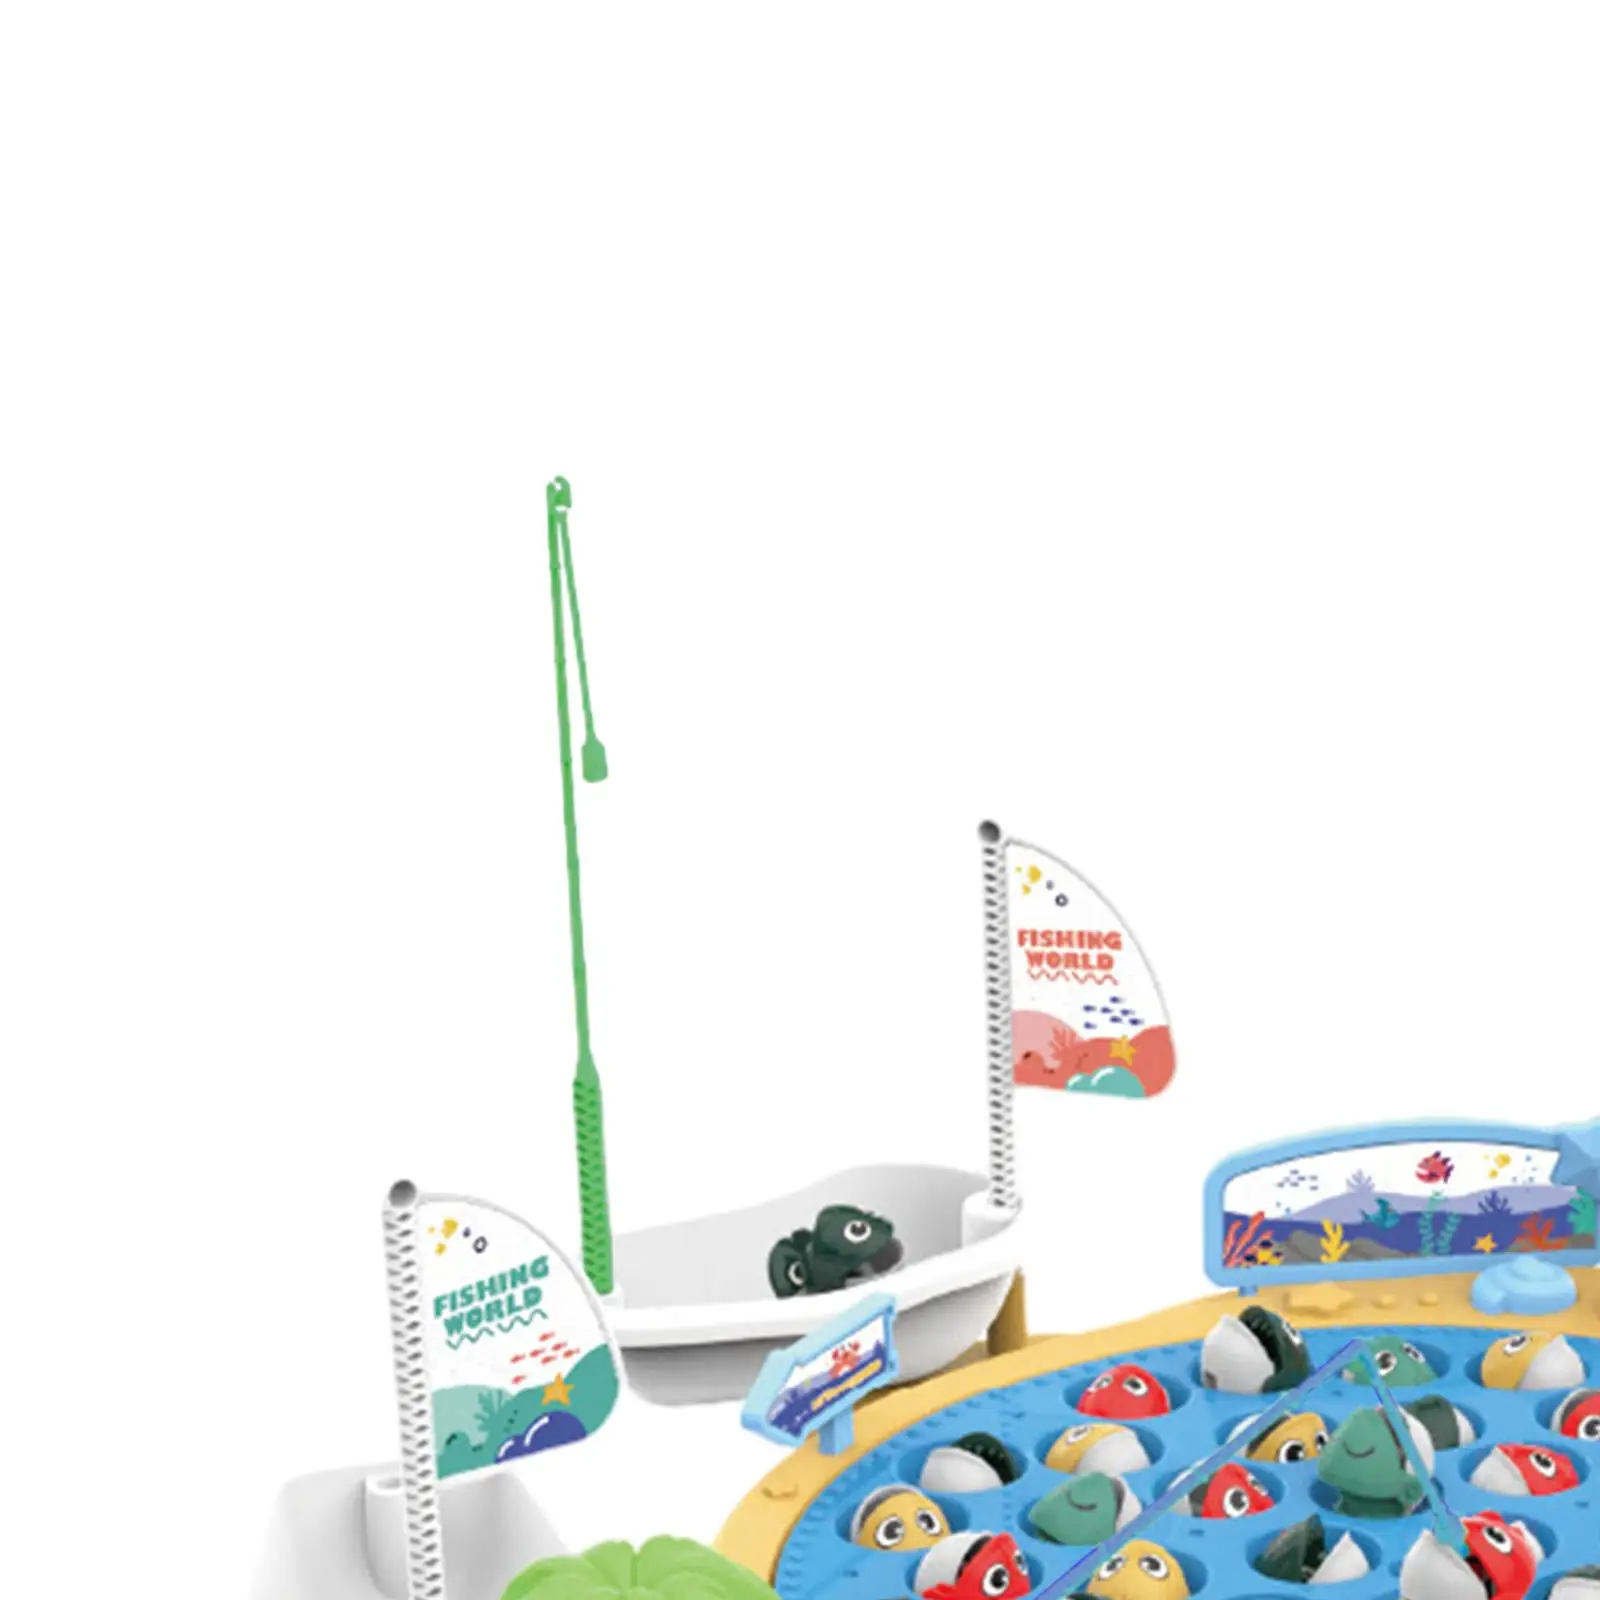 Fishing Game Play Set Developmental Toy Fine Motor Skill Teaching Aid Fishing Game Toy for Boys Children Toddlers Holiday Gifts